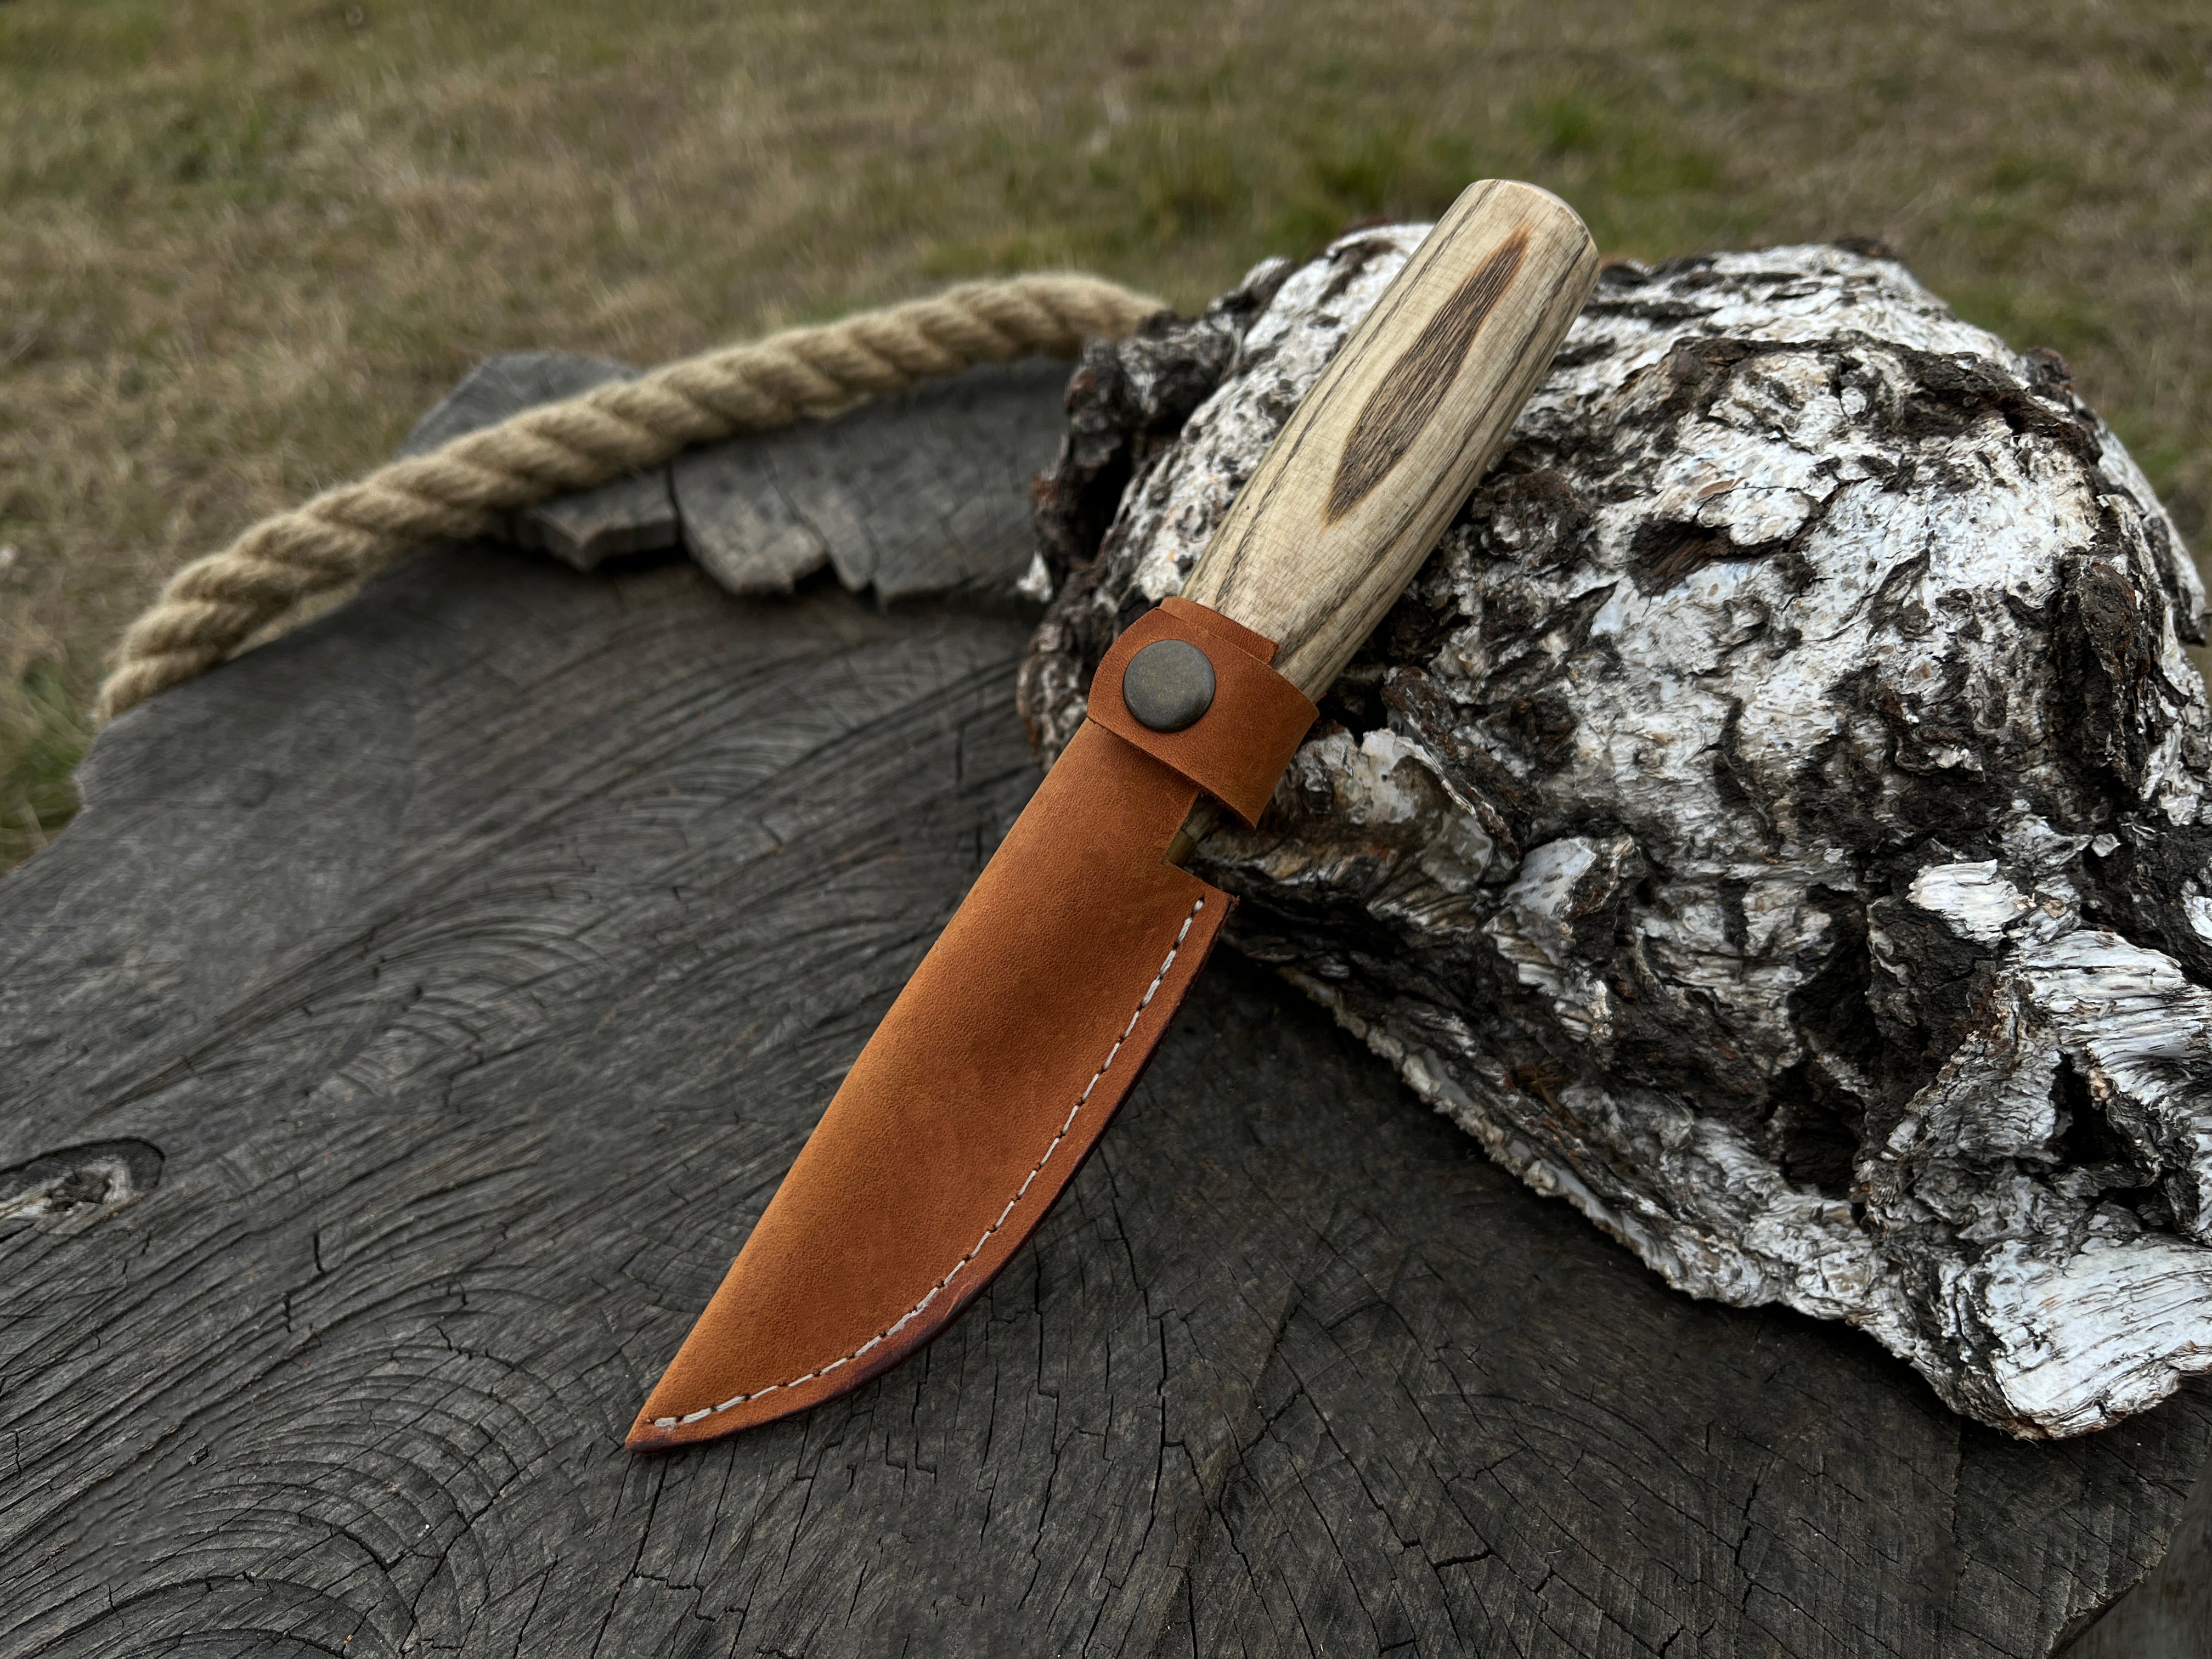 Hand-Forged Whittling Sloyd Knife, 10 cm (3.9 inches)